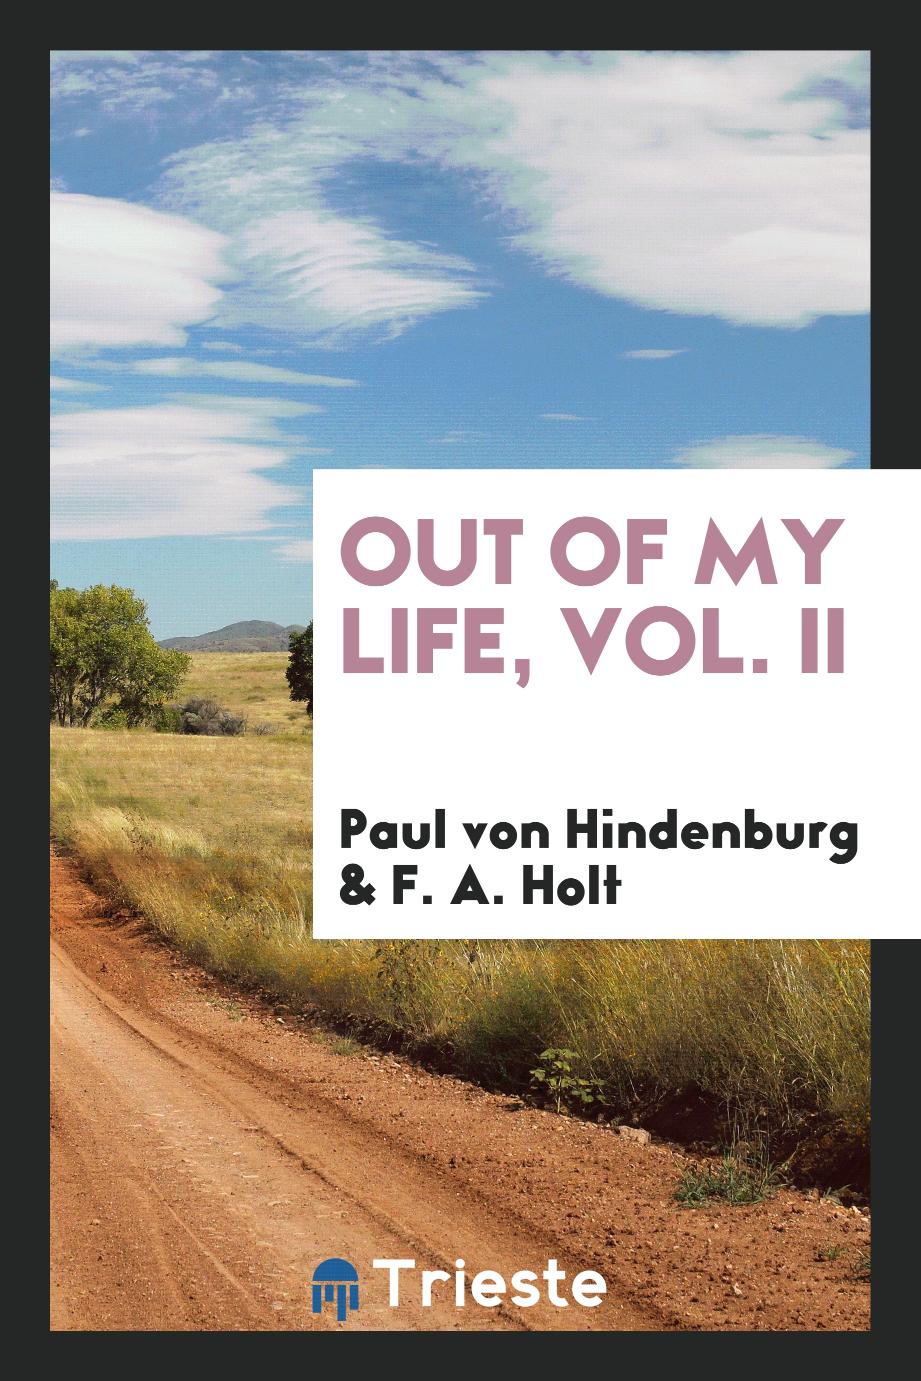 Out of My Life, Vol. II